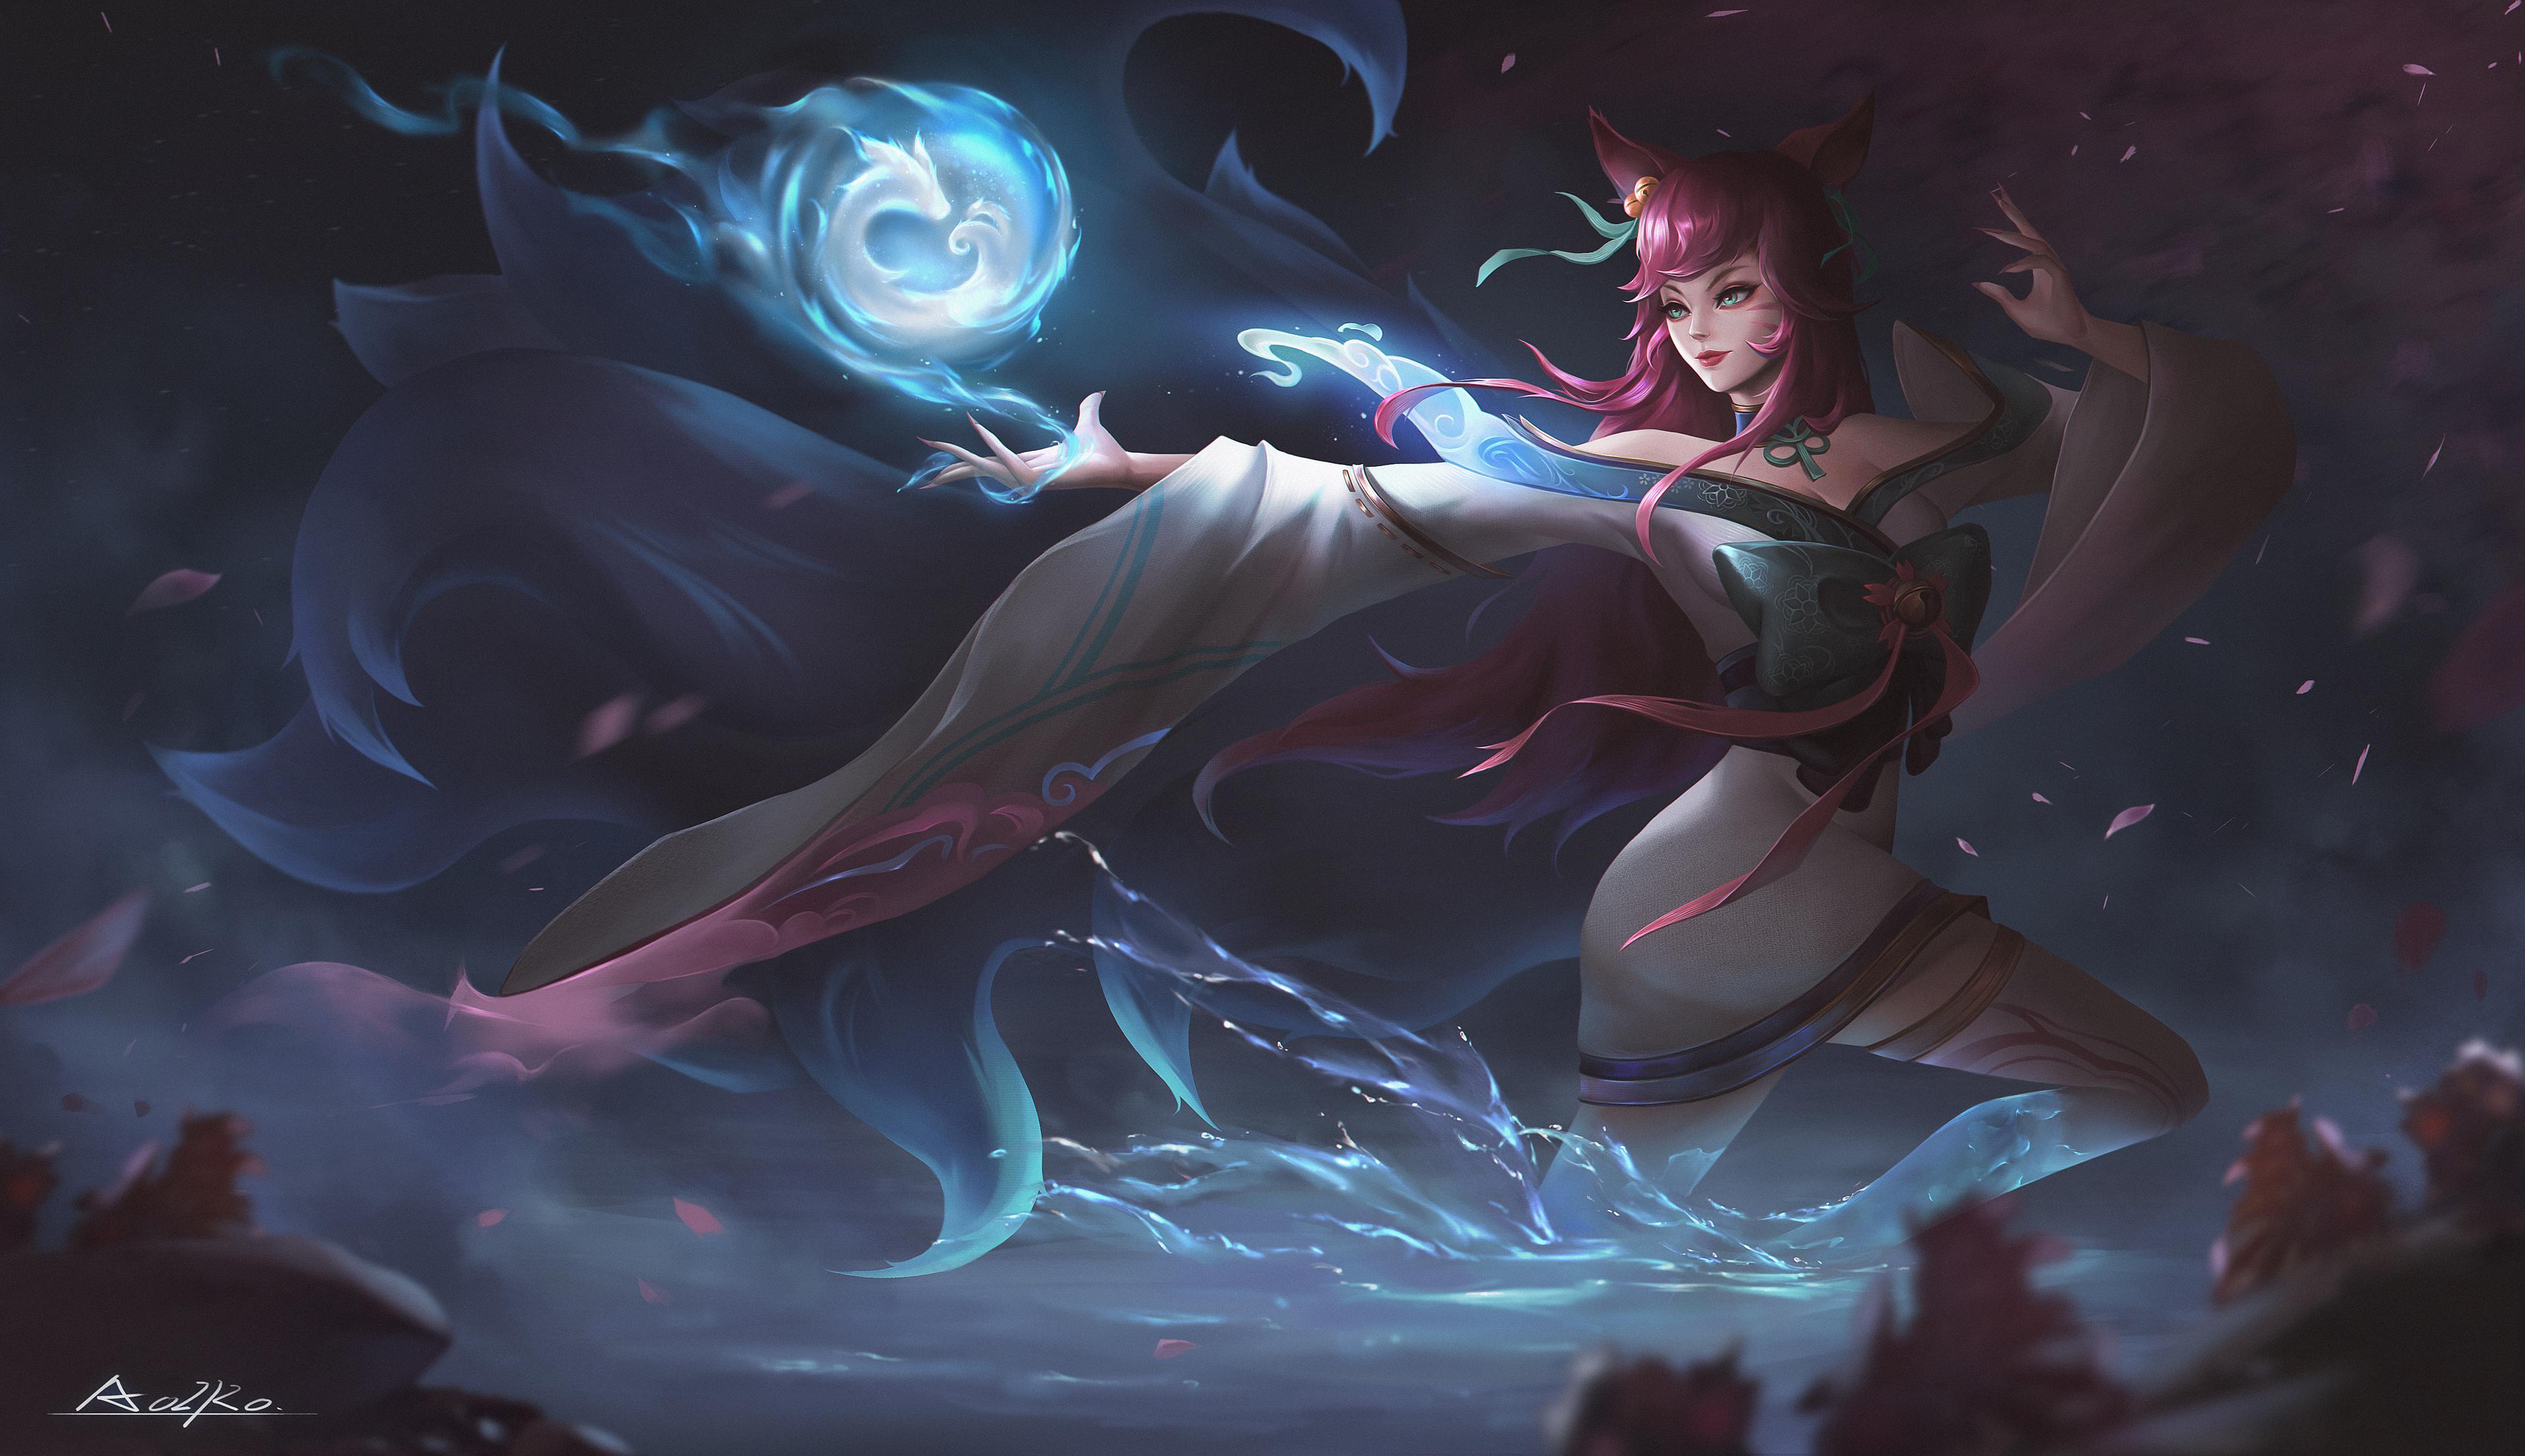 Anime 3840x2215 League of Legends Ahri (League of Legends) Riot Games artwork fantasy girl PC gaming watermarked video game girls fantasy art video game art video game characters